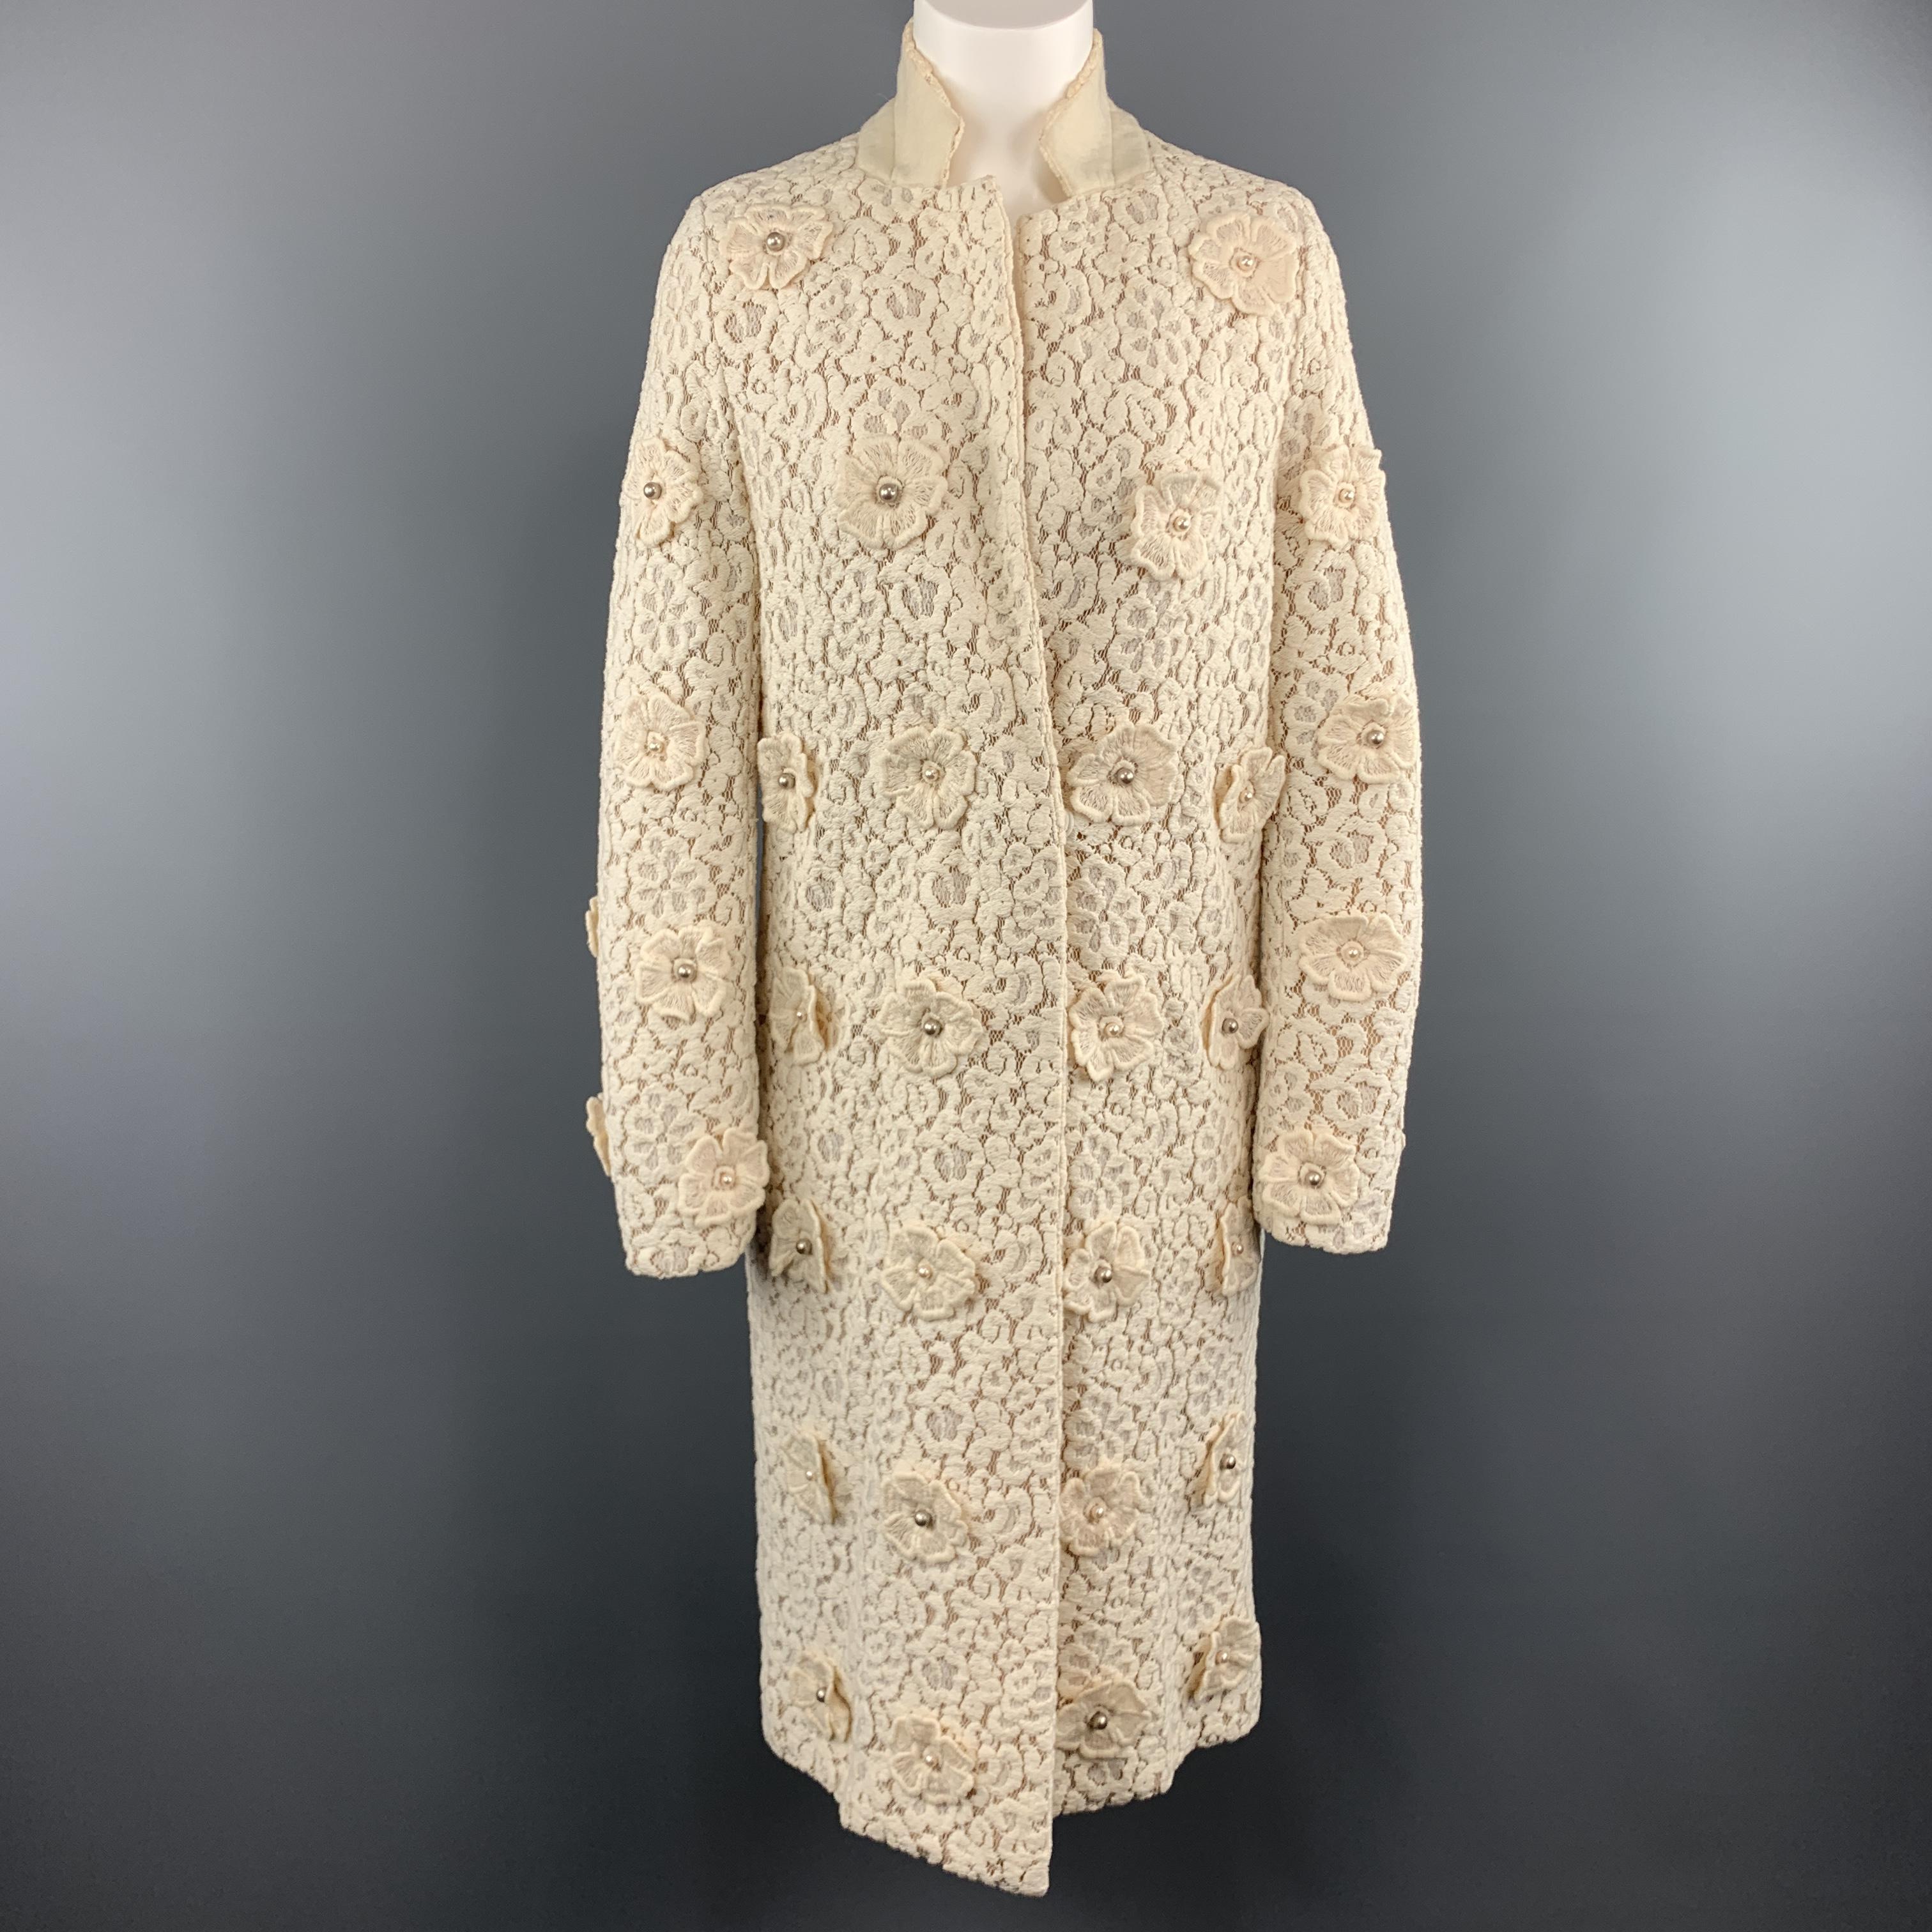 CHLOE evening coat comes in cream chunky lace with a notch lapel, hidden snap closures, tan silk chiffon liner, and flower applique's with faux pearls throughout. 

Excellent Pre-Owned Condition.
Marked: IT 40

Measurements:

Shoulder: 15 in.
Bust: